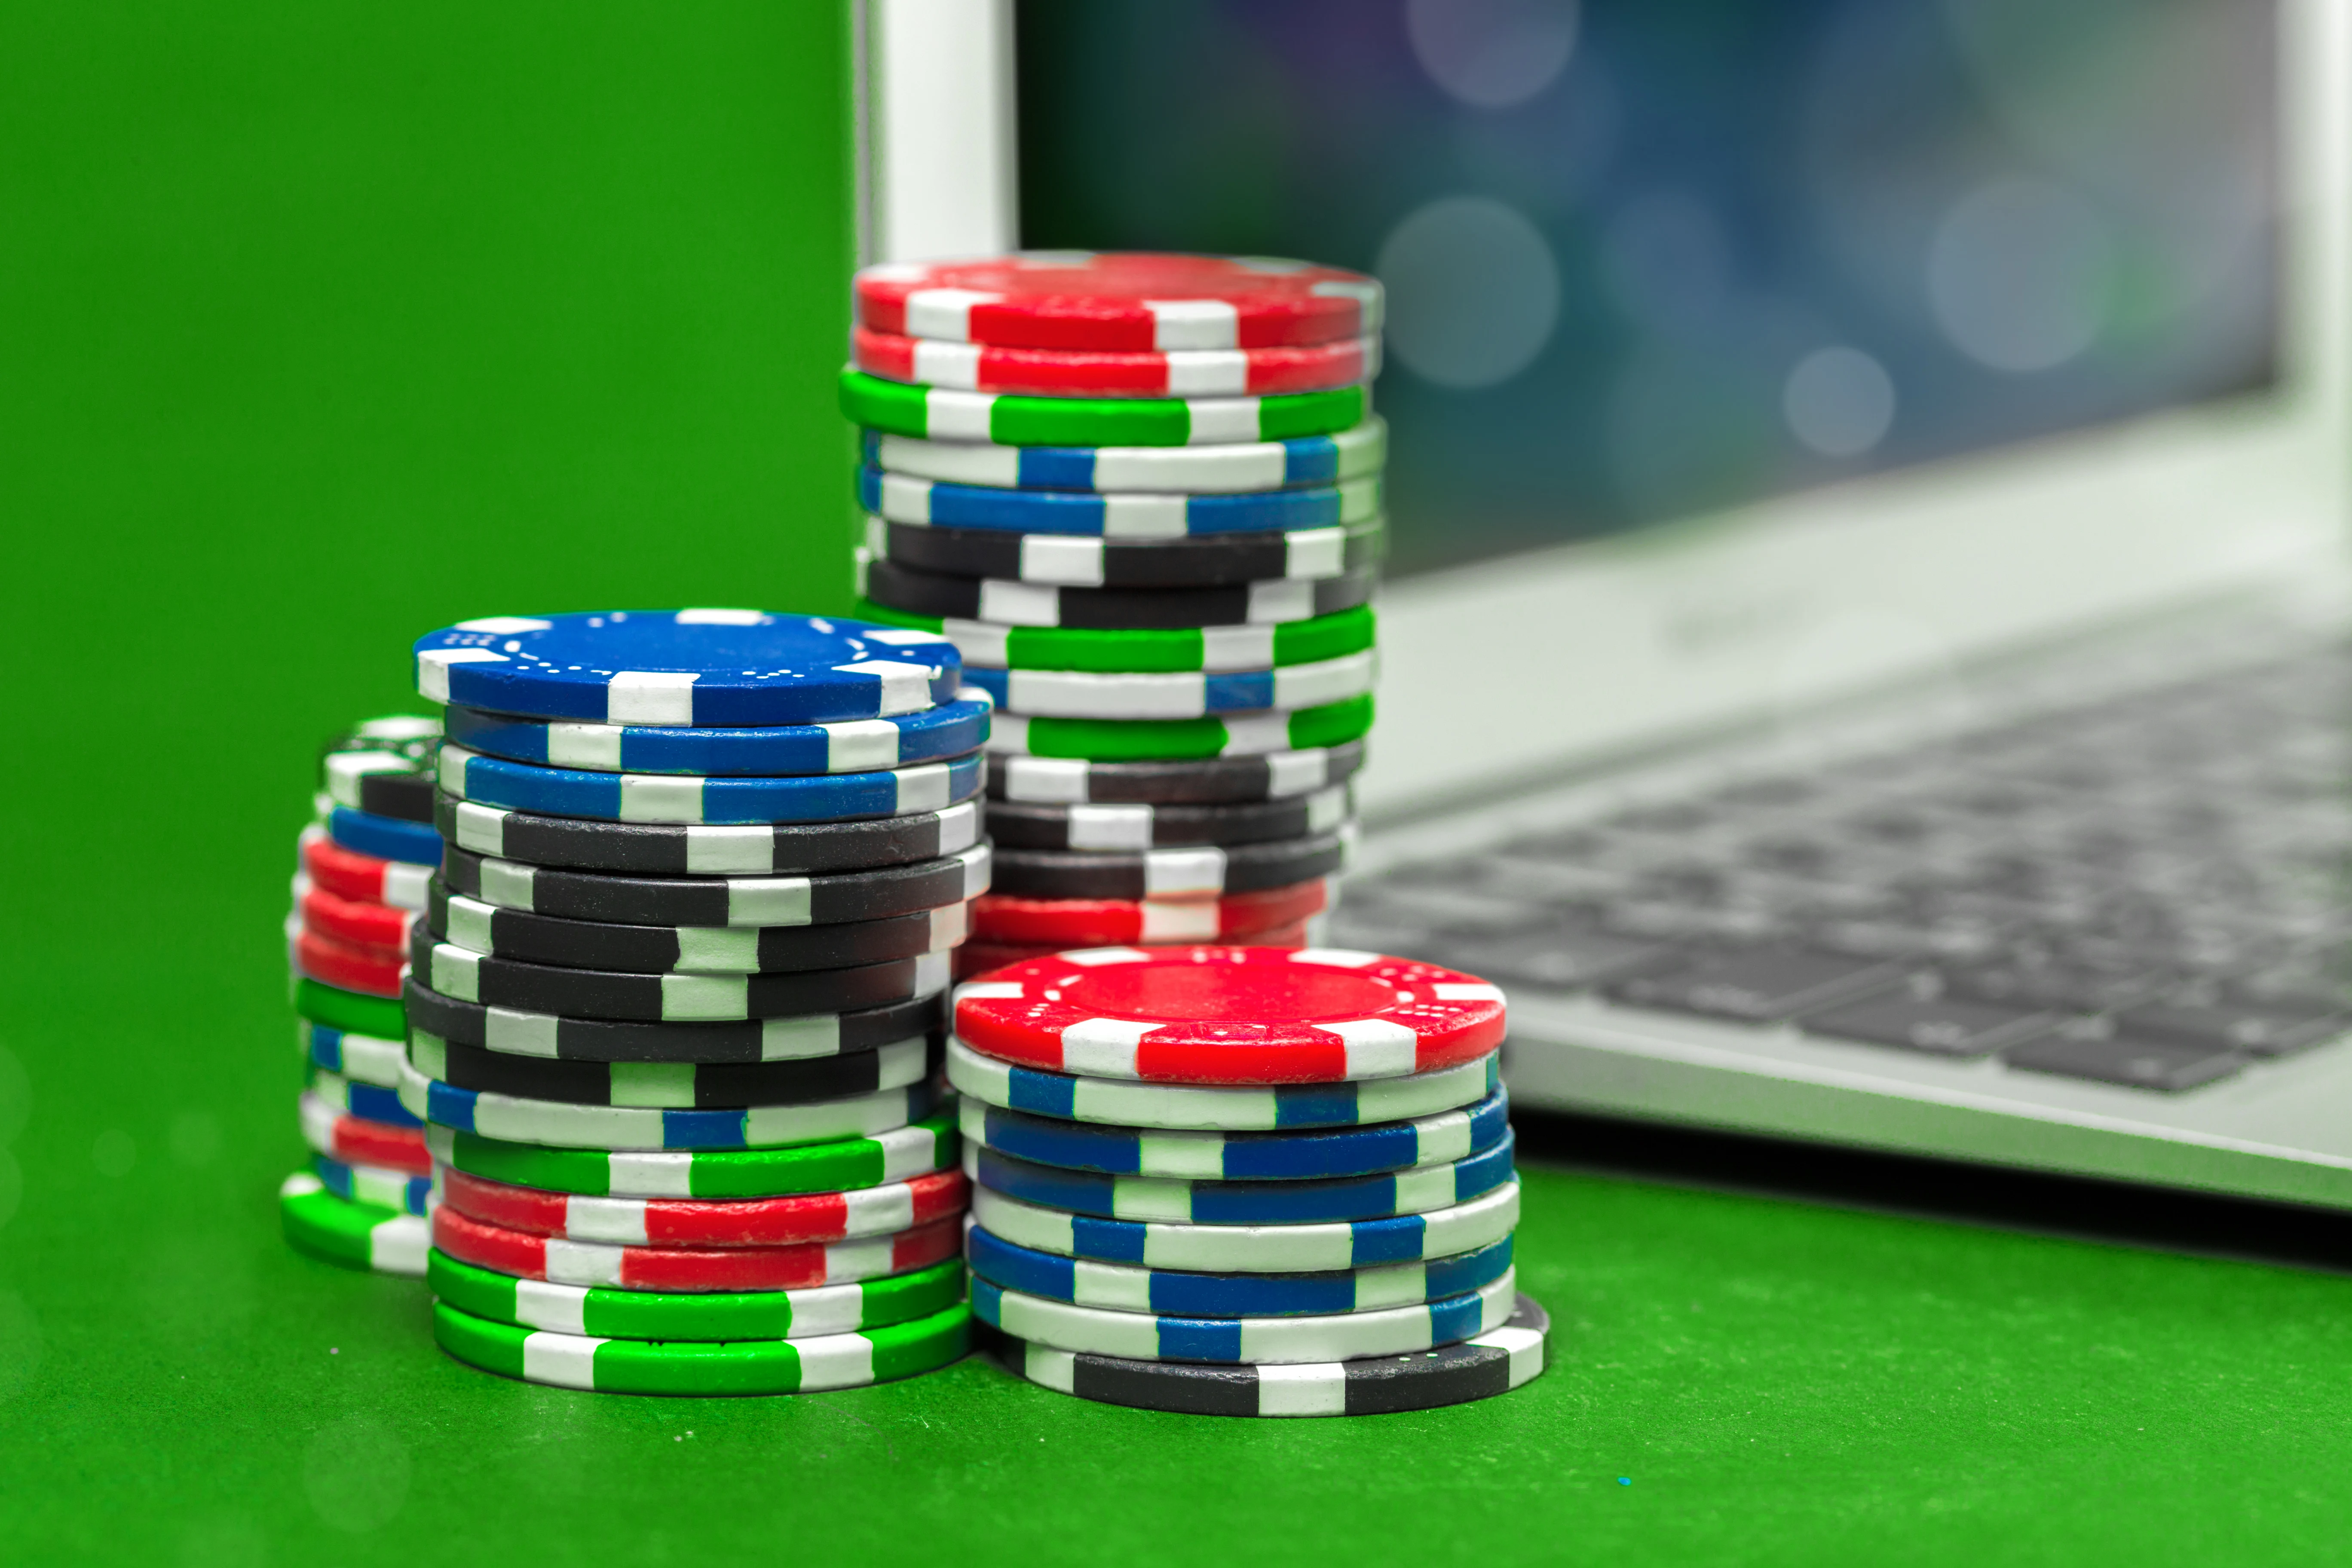 A stack of chips next to a blurred image of Apple Macbook Air on a green casino table